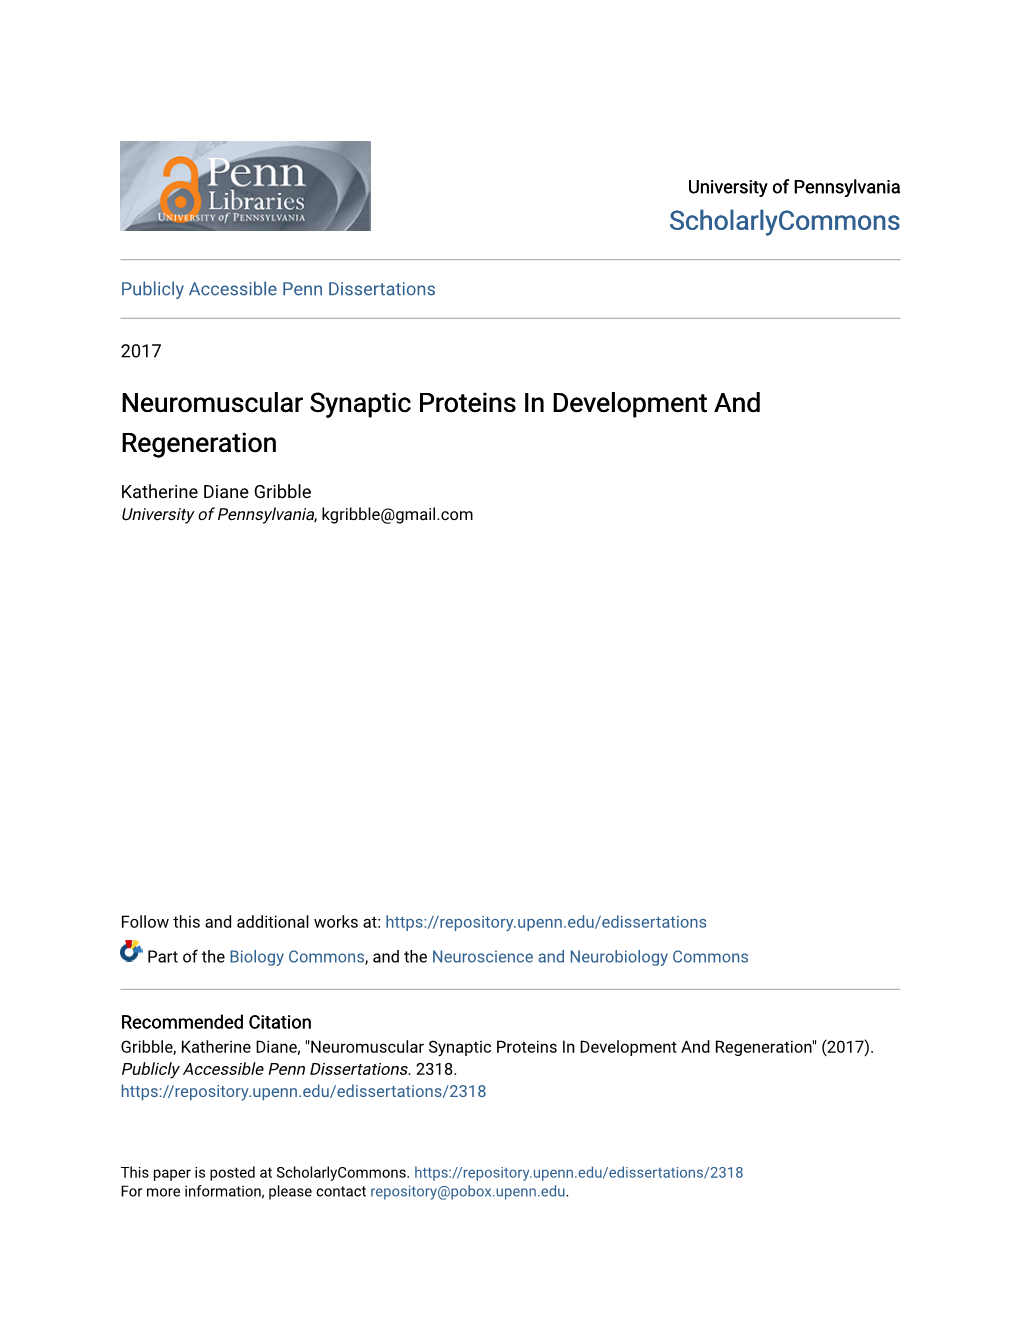 Neuromuscular Synaptic Proteins in Development and Regeneration